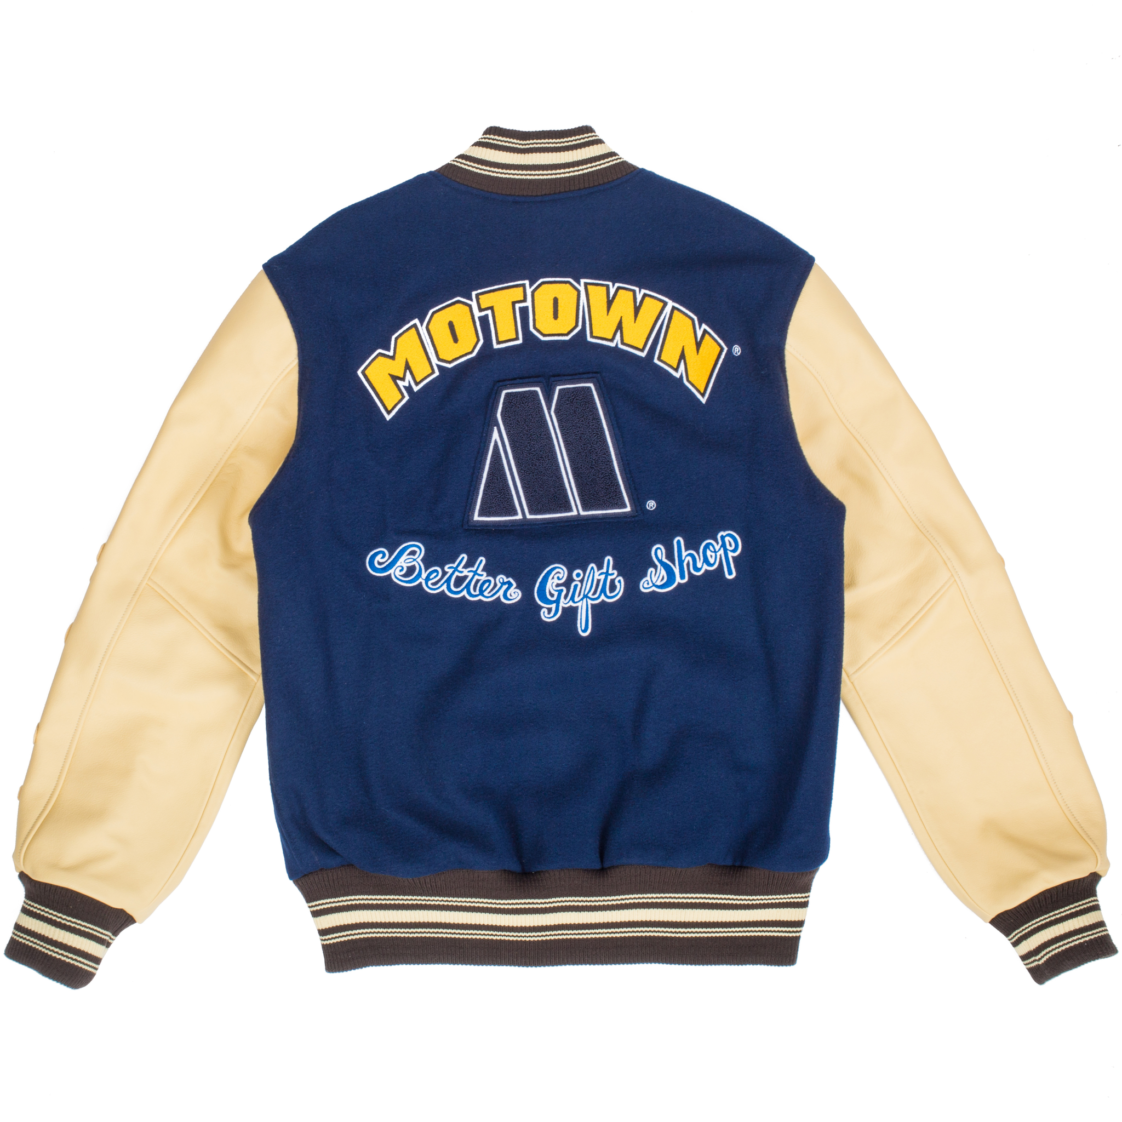 Motown Records celebrate 60th anniversary with limited-edition jacket ...